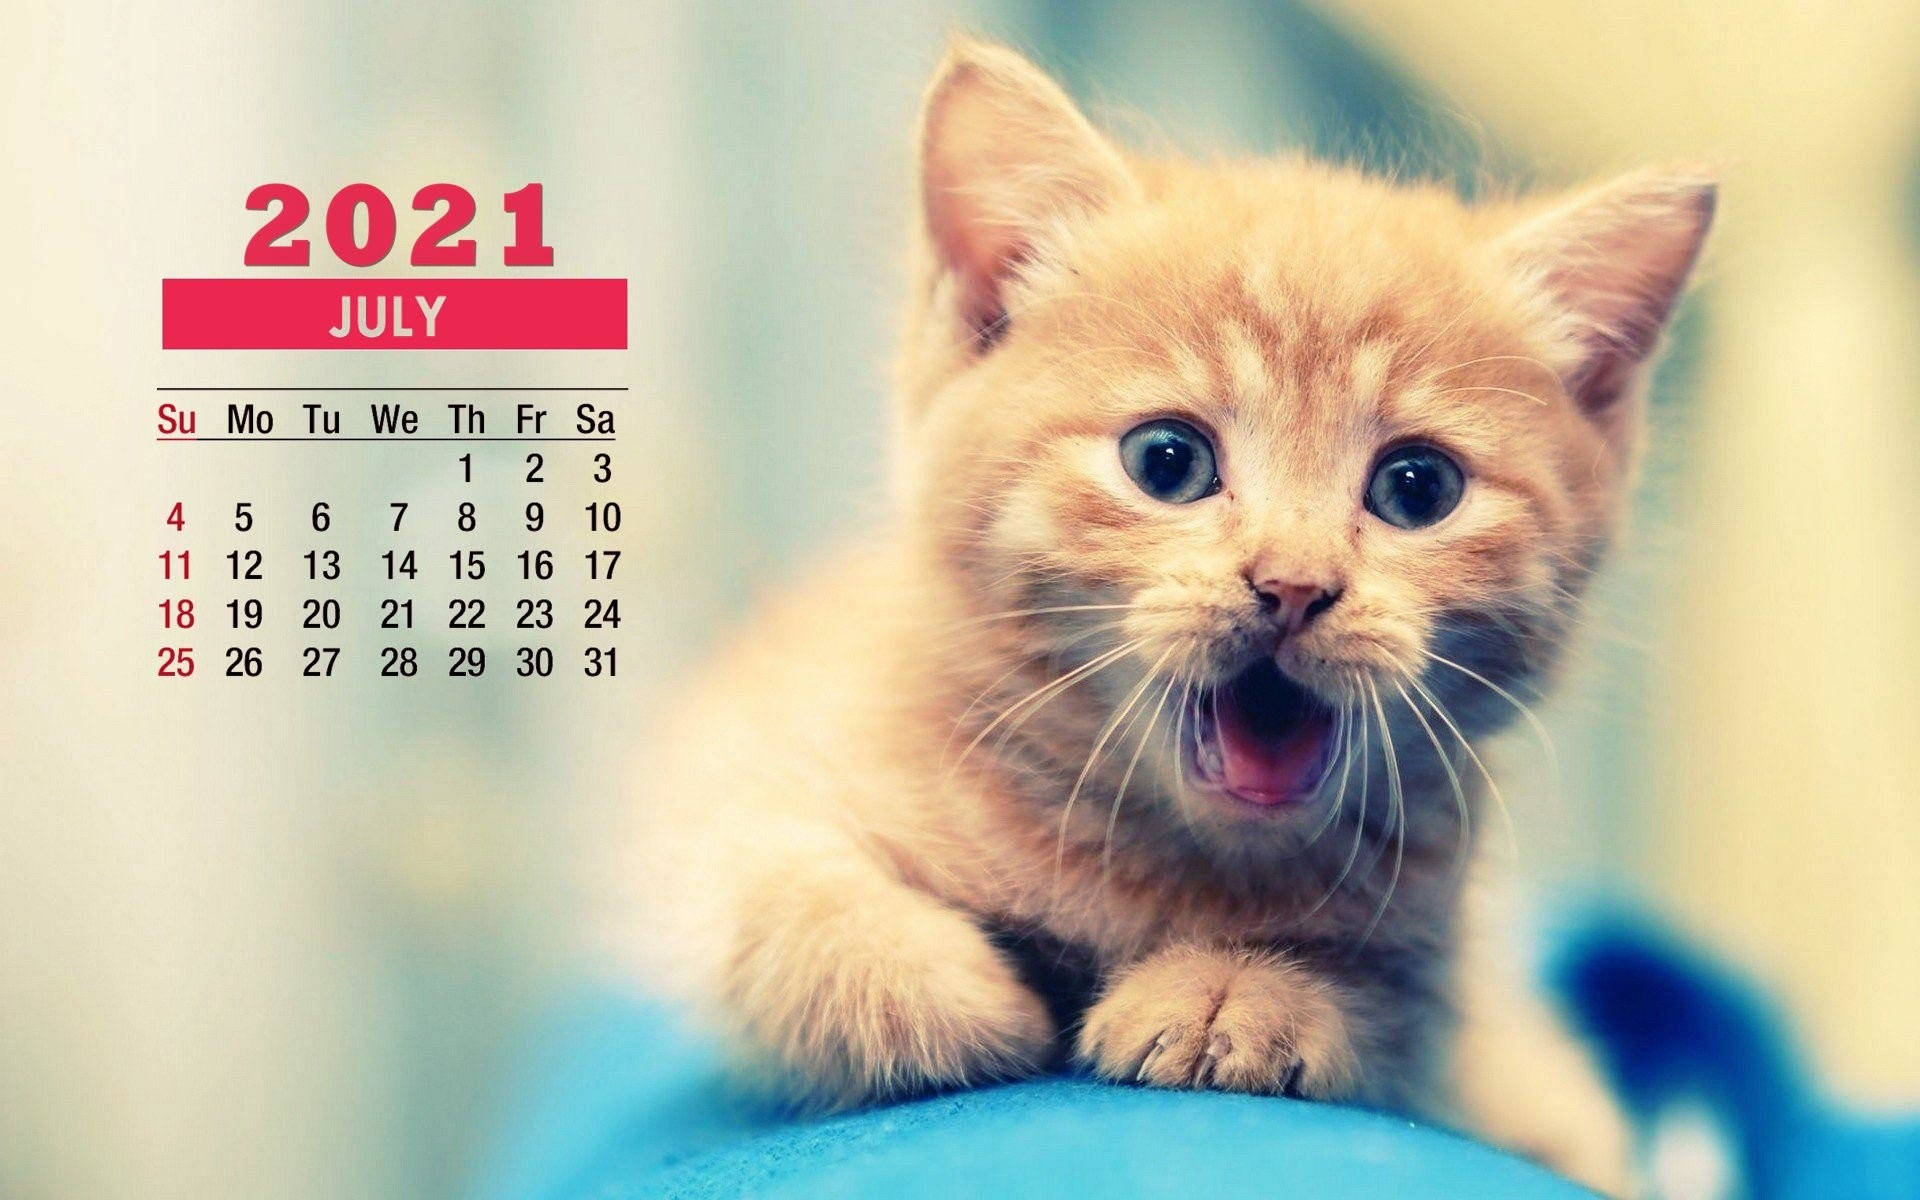 Enjoy The Sunshine With This Adorable Kitten In July! Background